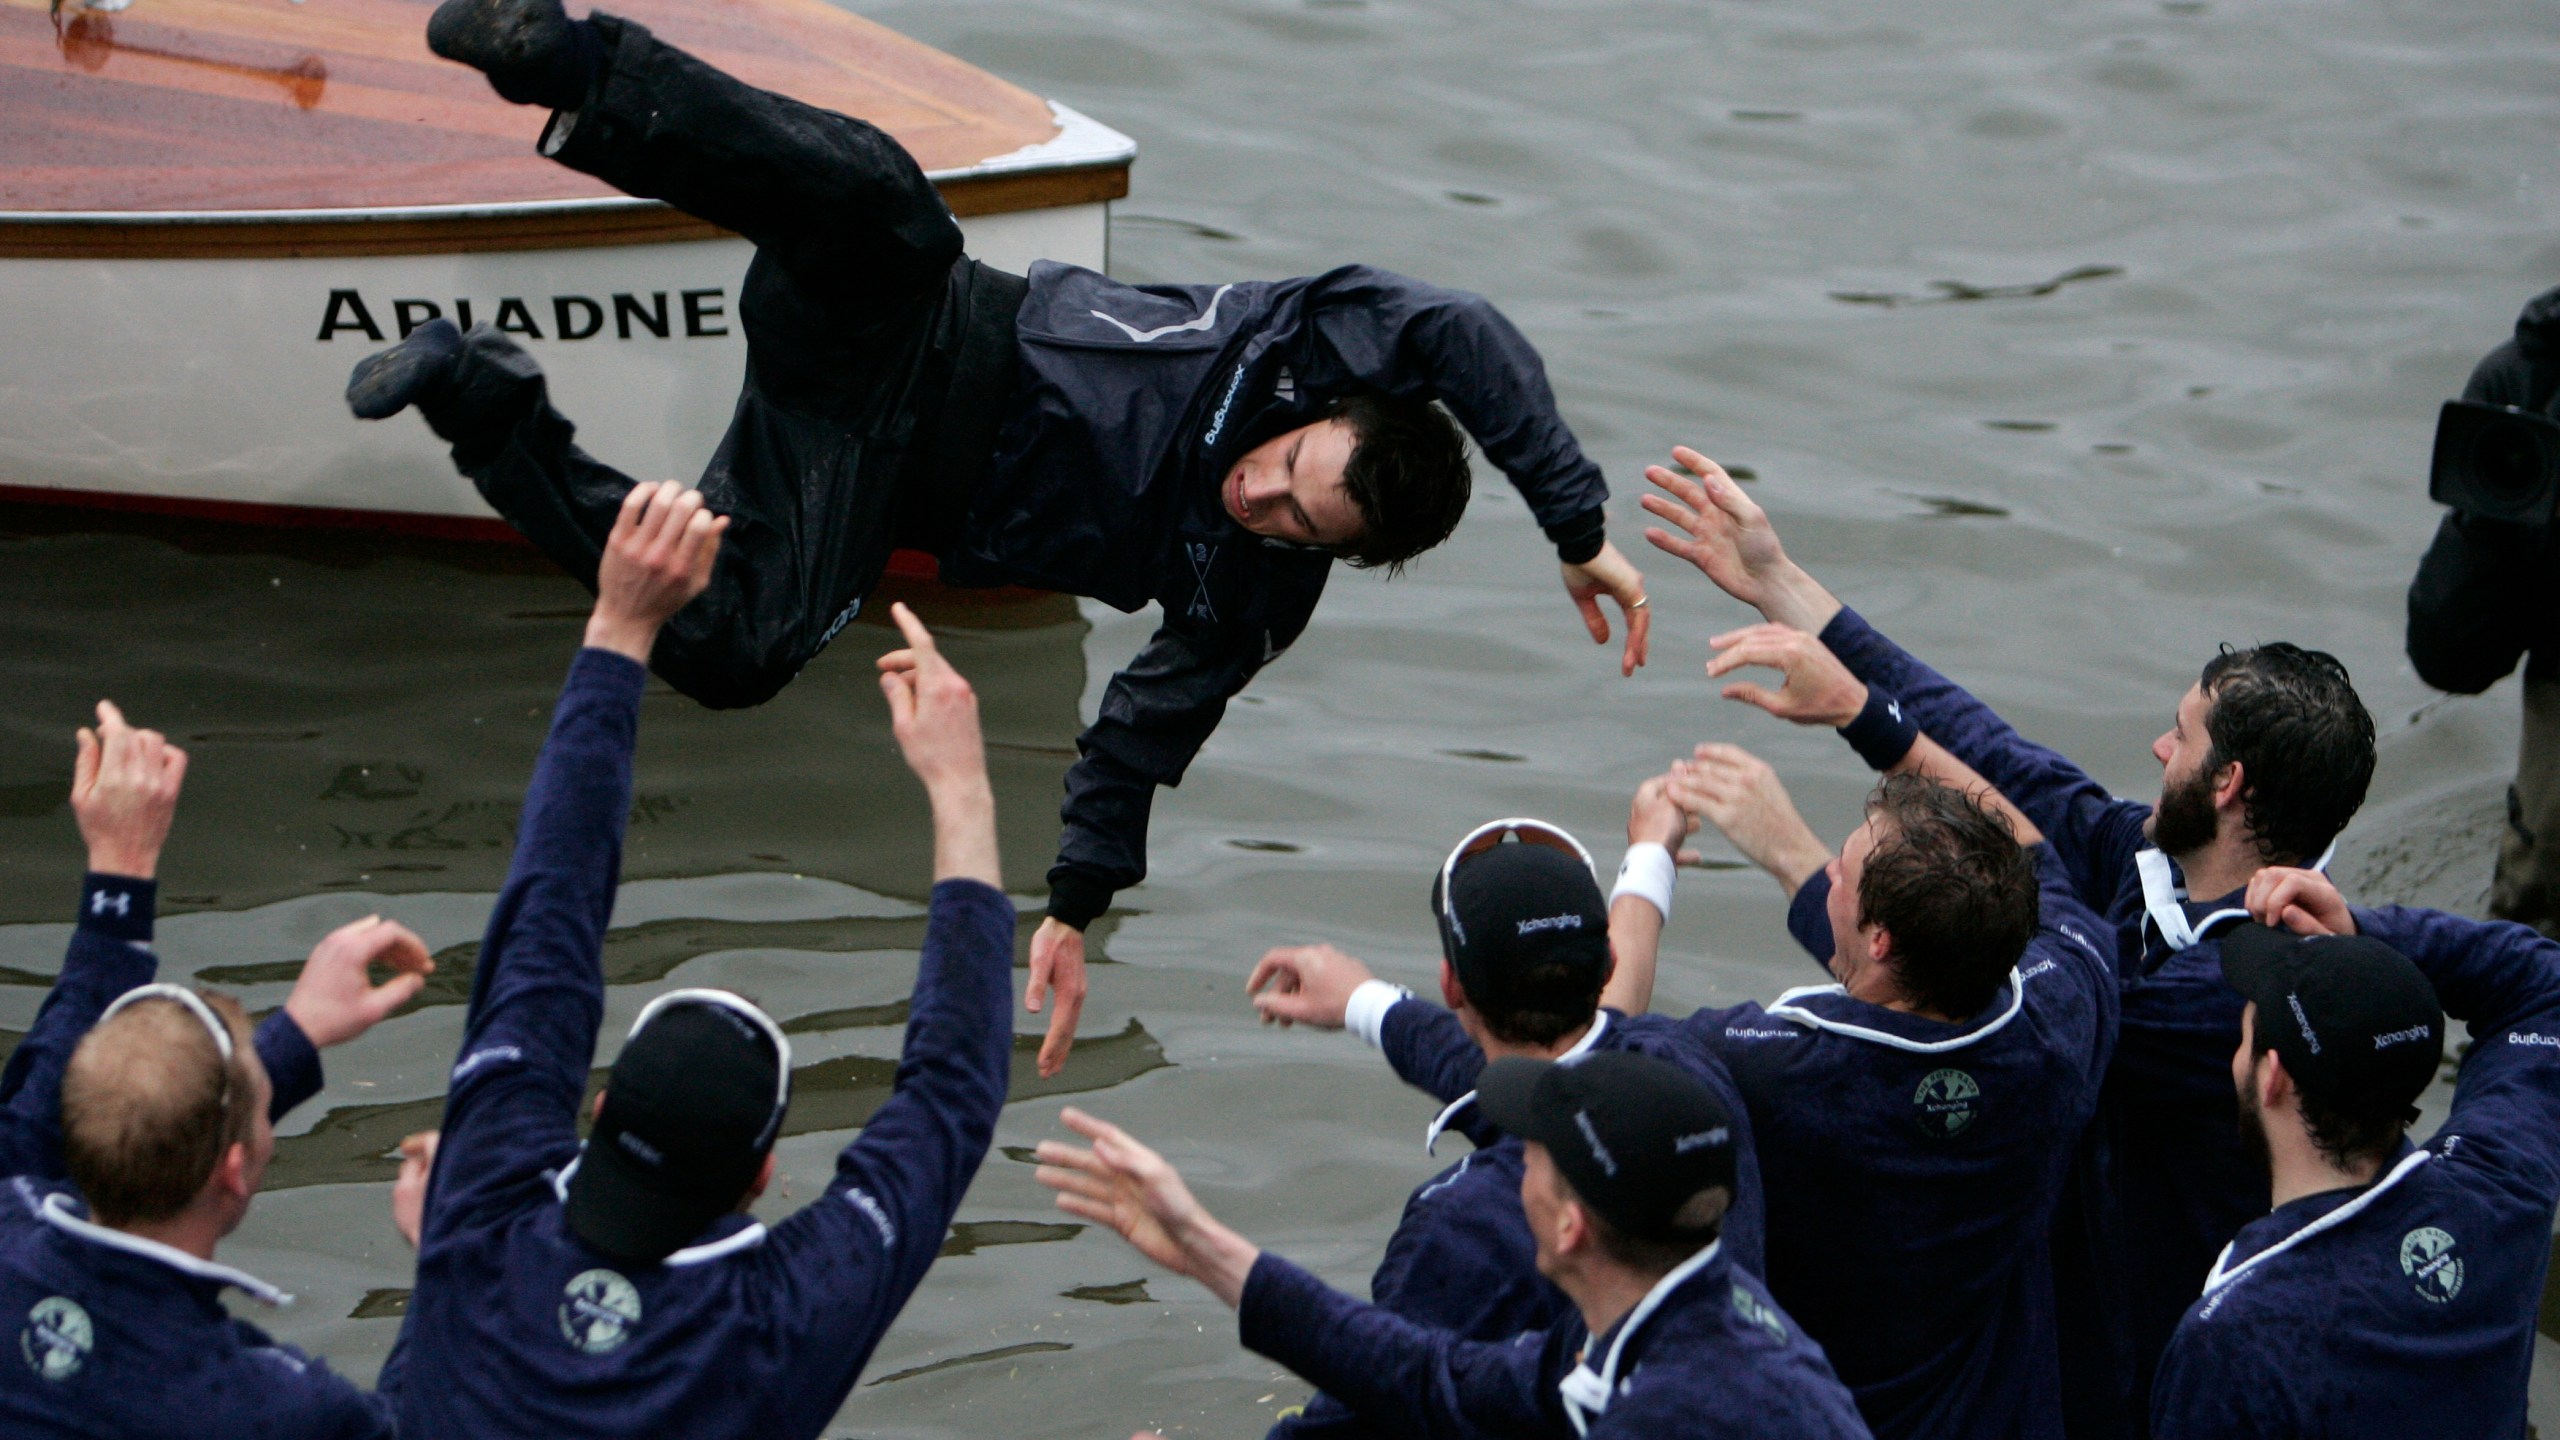 FILE - Members of the Oxford University rowing team throw their cox Nicholas Brodie, centre, into the river after beating Cambridge University, at the 154th annual Boat Race on the River Thames, London, Saturday, March 29, 2008. Jumping into London’s River Thames has been the customary celebration for members of the winning crew in the annual Boat Race between storied English universities Oxford and Cambridge. Now researchers say it comes with a health warning. (AP Photo/Lefteris Pitarakis, File)